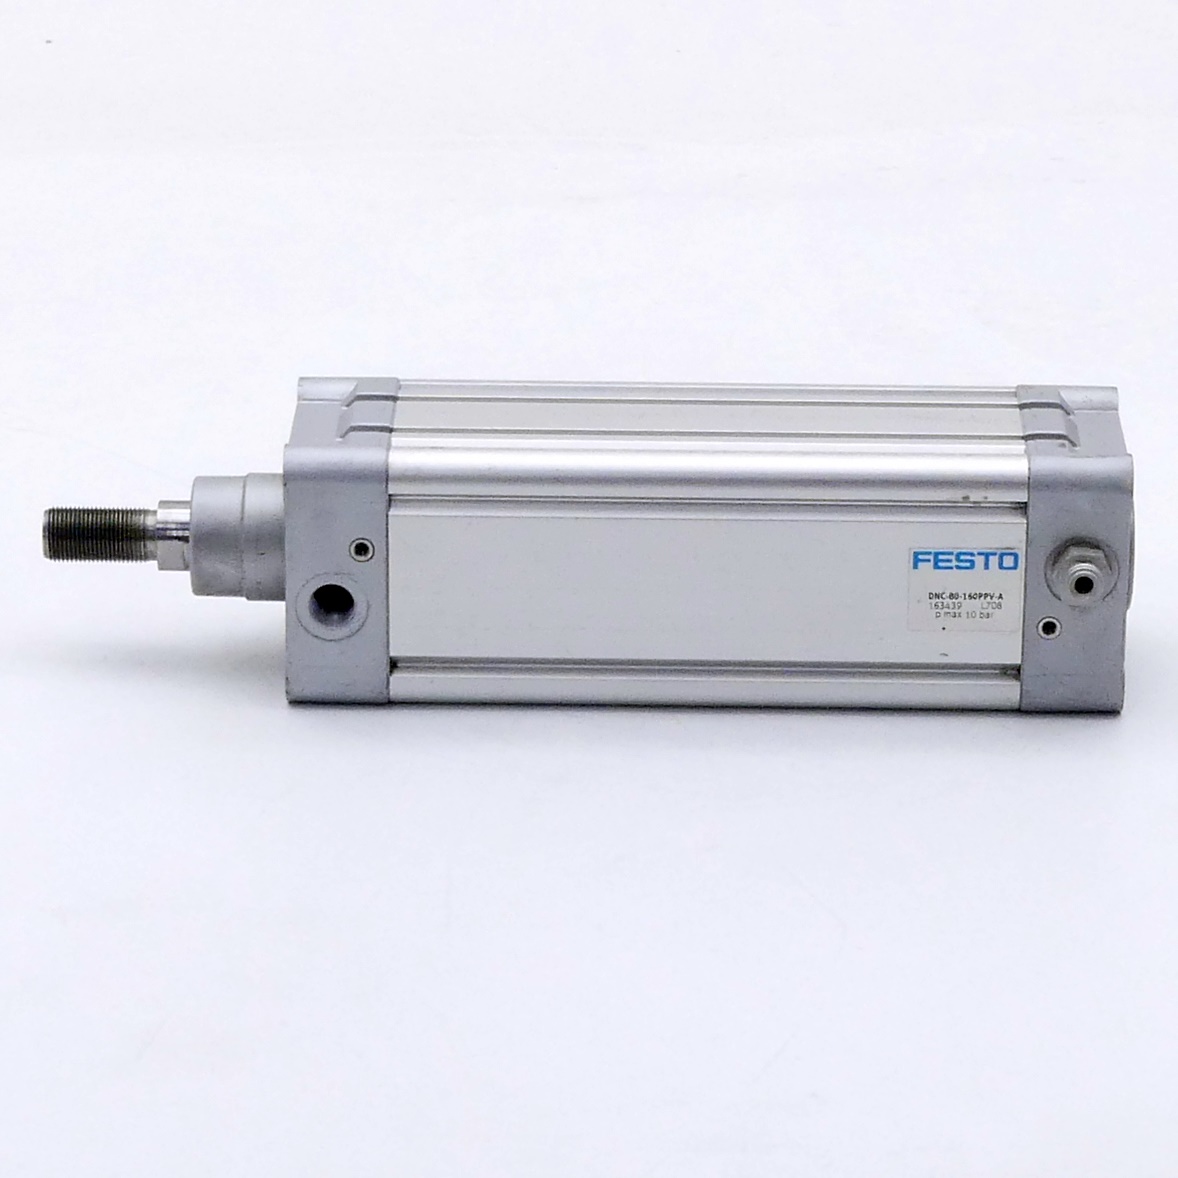 Scratch 1pcs FESTO / DNC-80-80-PPV-A / Pneumatic Cylinder Used Details about    